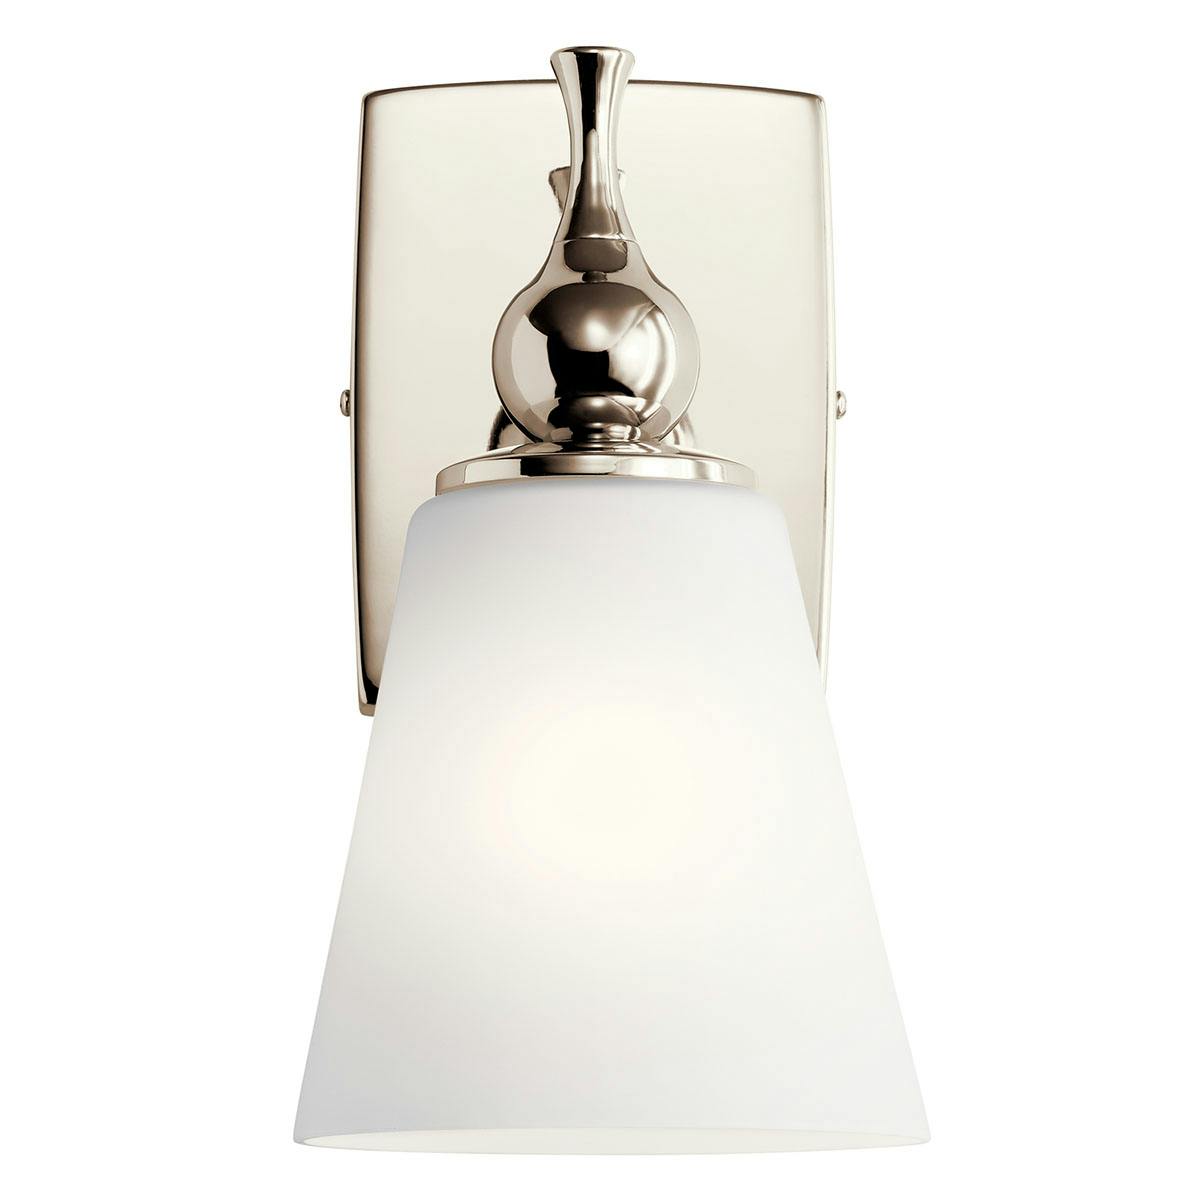 Front view of the Cosabella 1 Light Sconce Polished Nickel on a white background